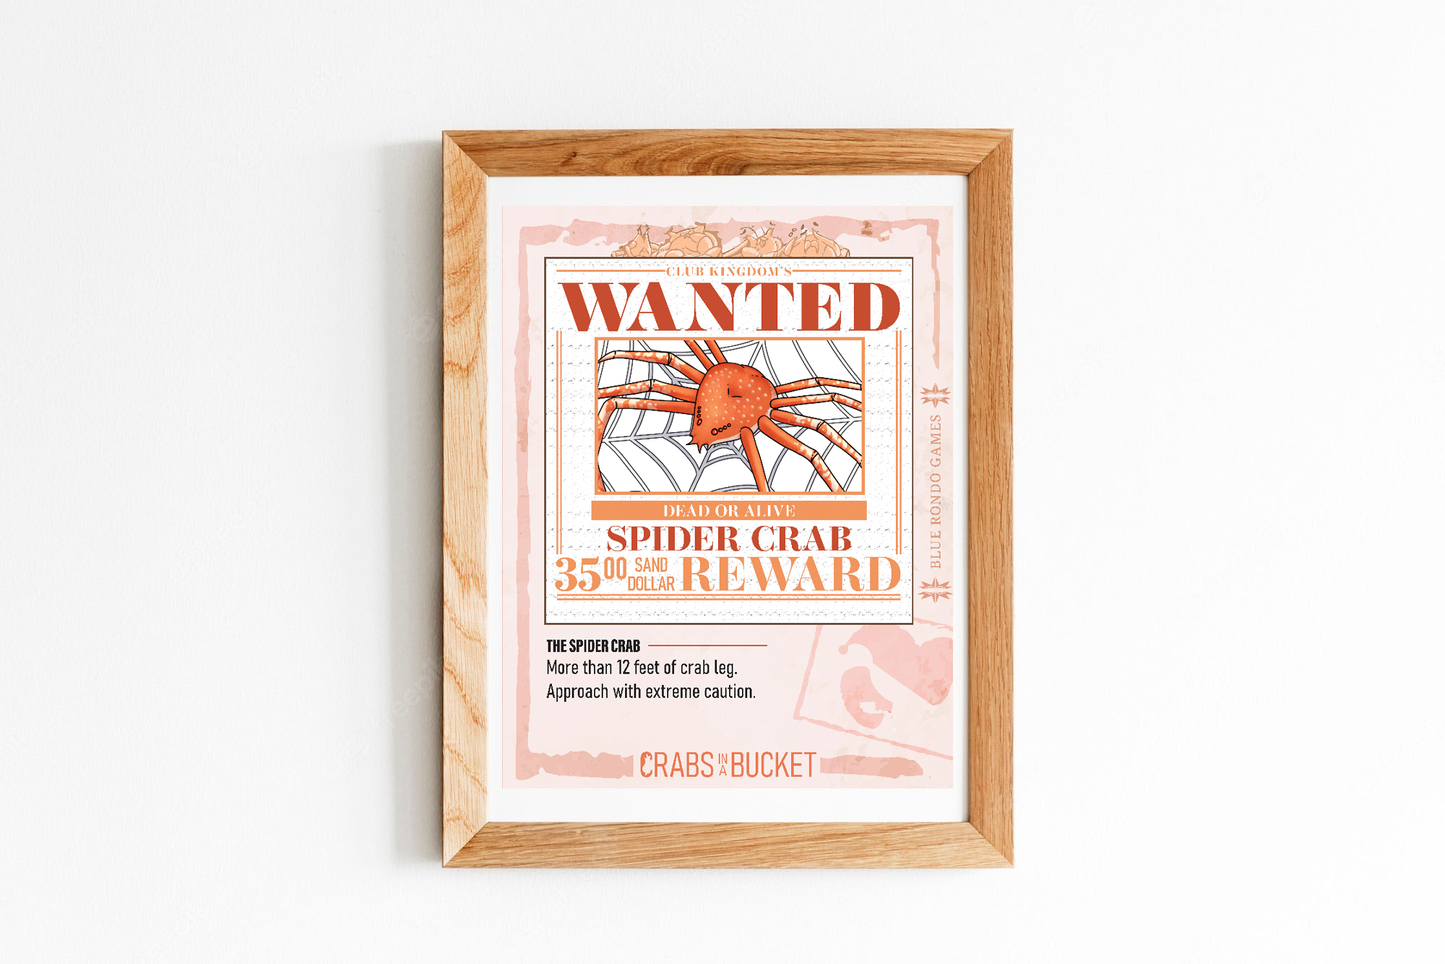 Spider Crab Wanted Poster